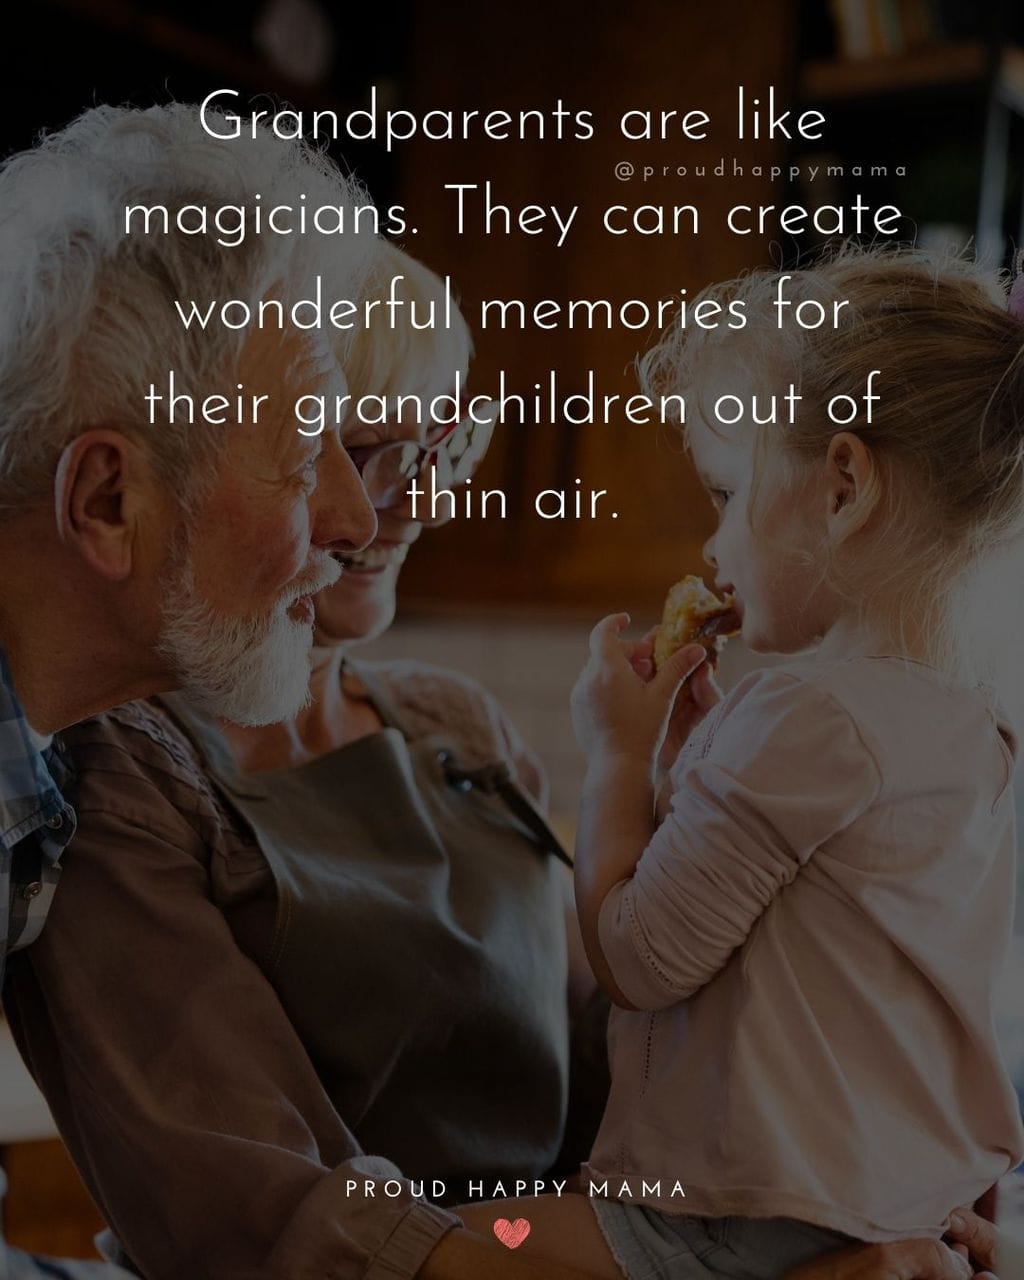 Grandparents And Grandchildren Quotes | Grandparents are like magicians. They can create wonderful memories for their grandchildren out of thin air.